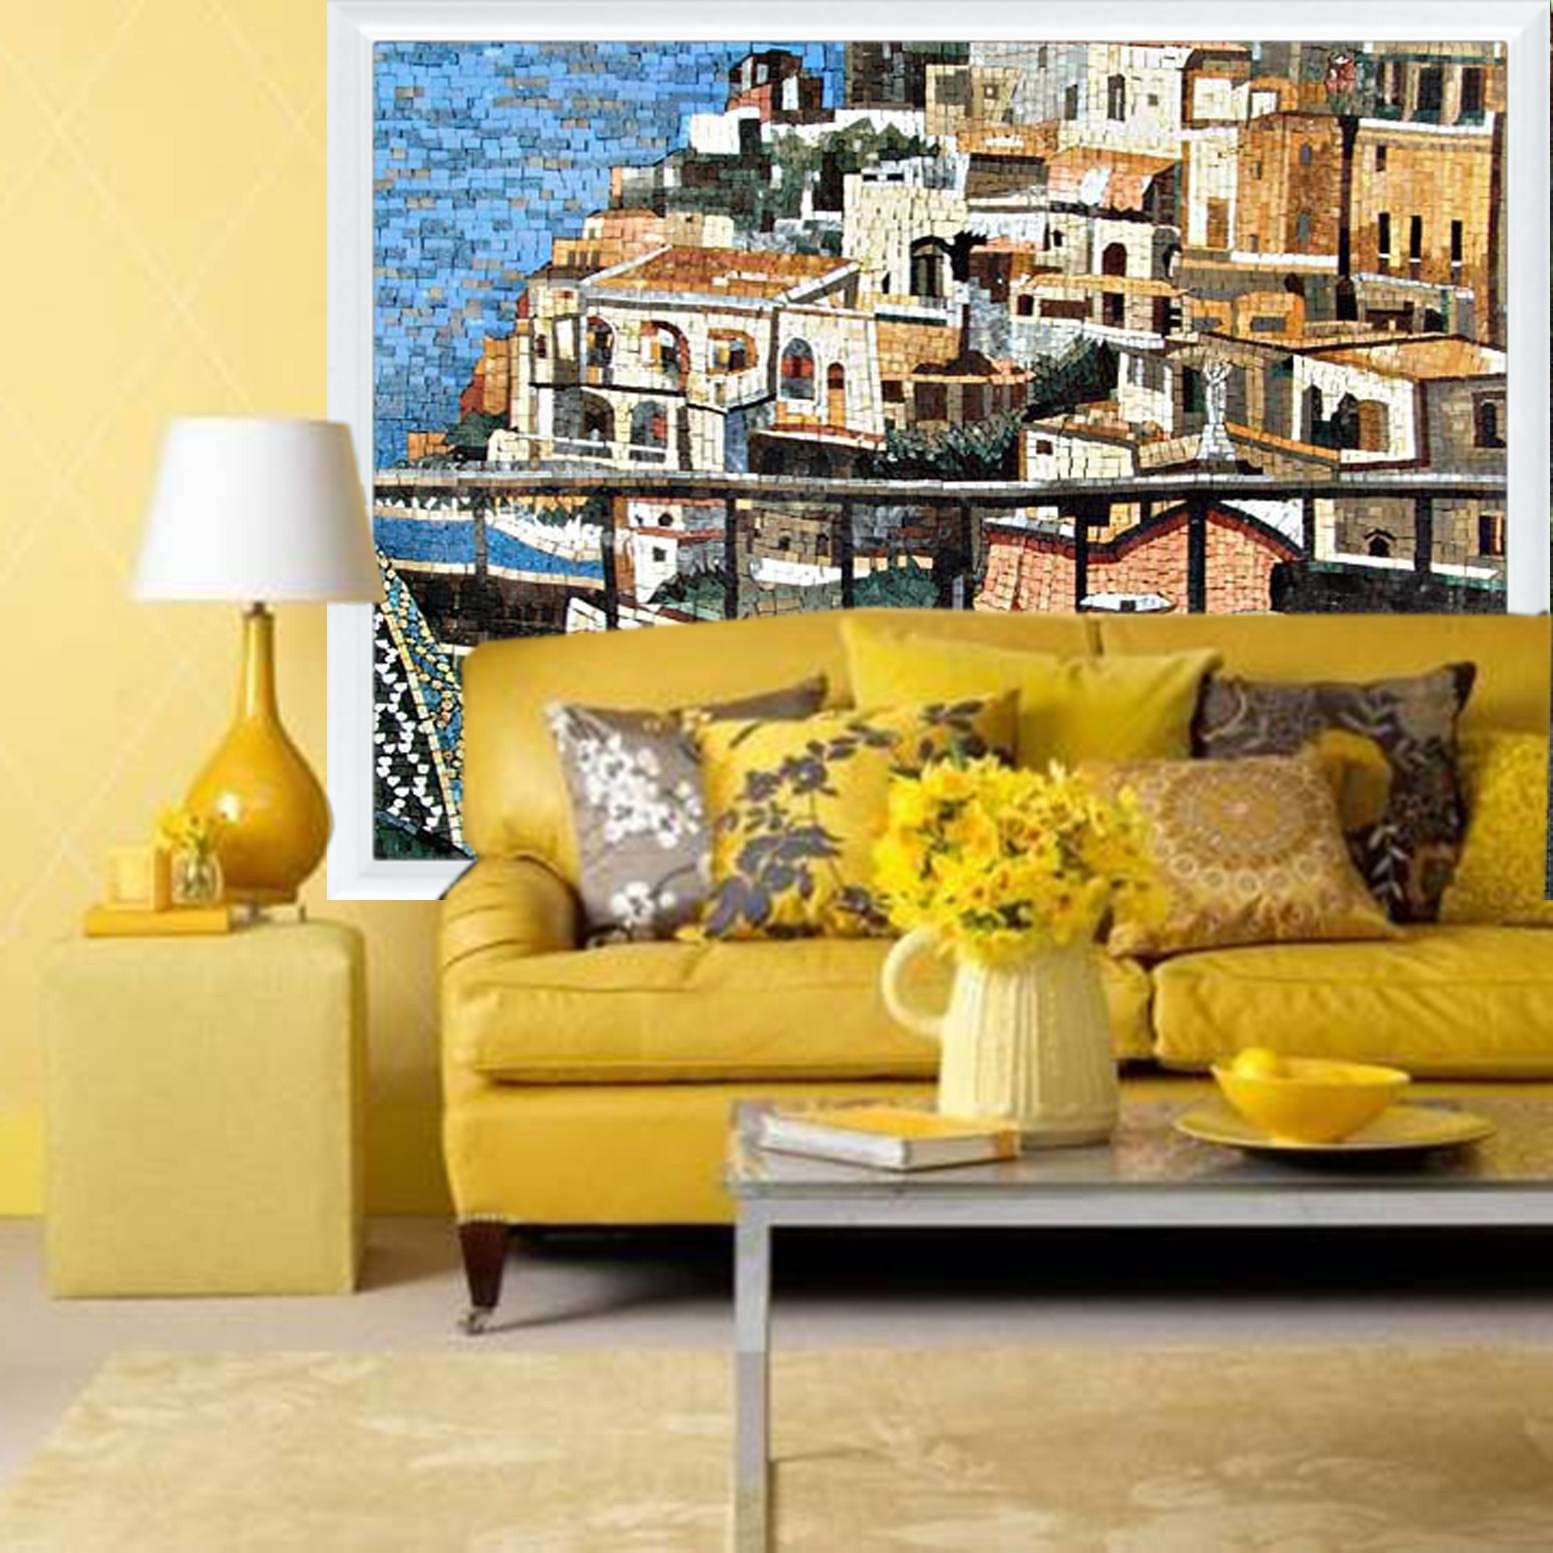 Yellow Paint For Living Room
 DÉCOR IDEAS TO LAYER YOUR HOME THIS FALL 2016 2017